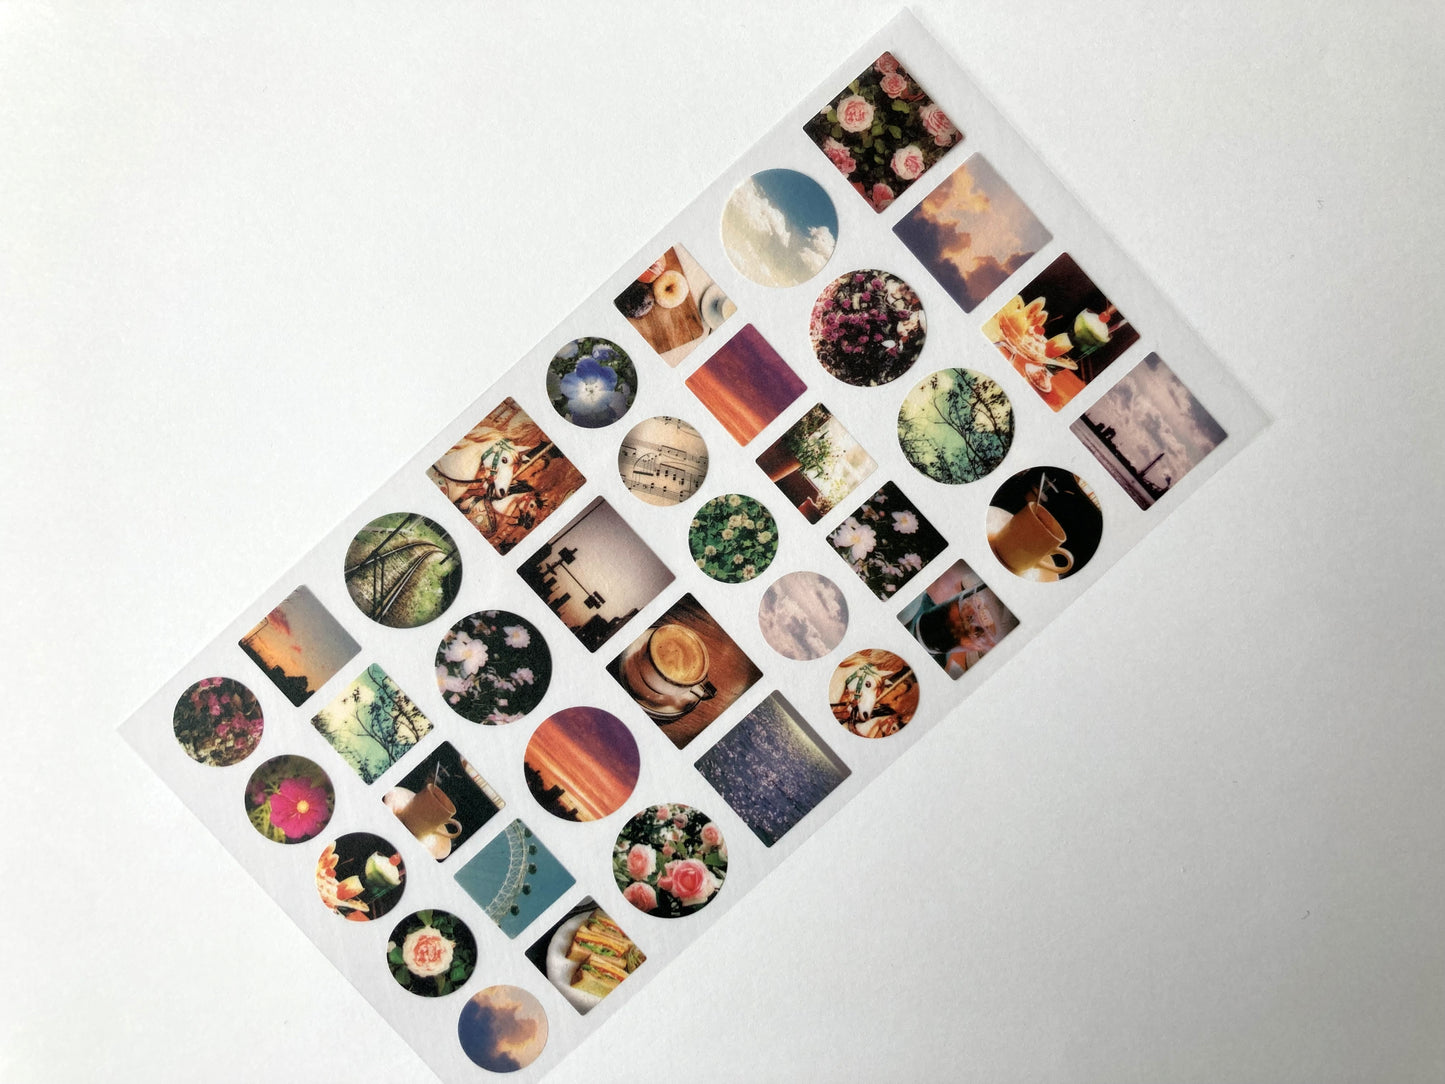 Sheer Photo Point Stickers